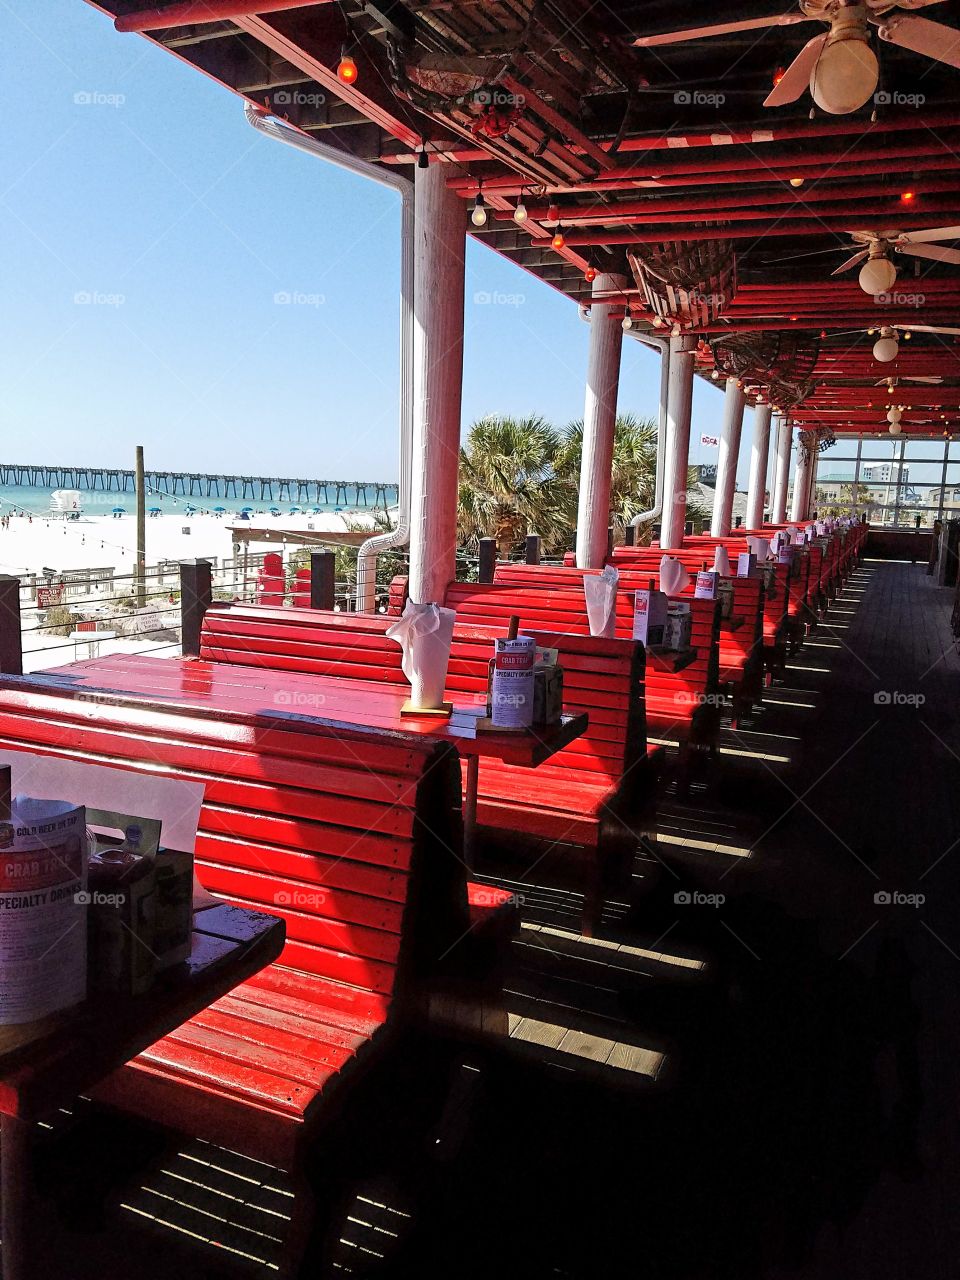 Red tables and bench seats, white pillars, ceiling fans and natural wood floors.  Beach front restaurant on Pensacola Beach Florida.